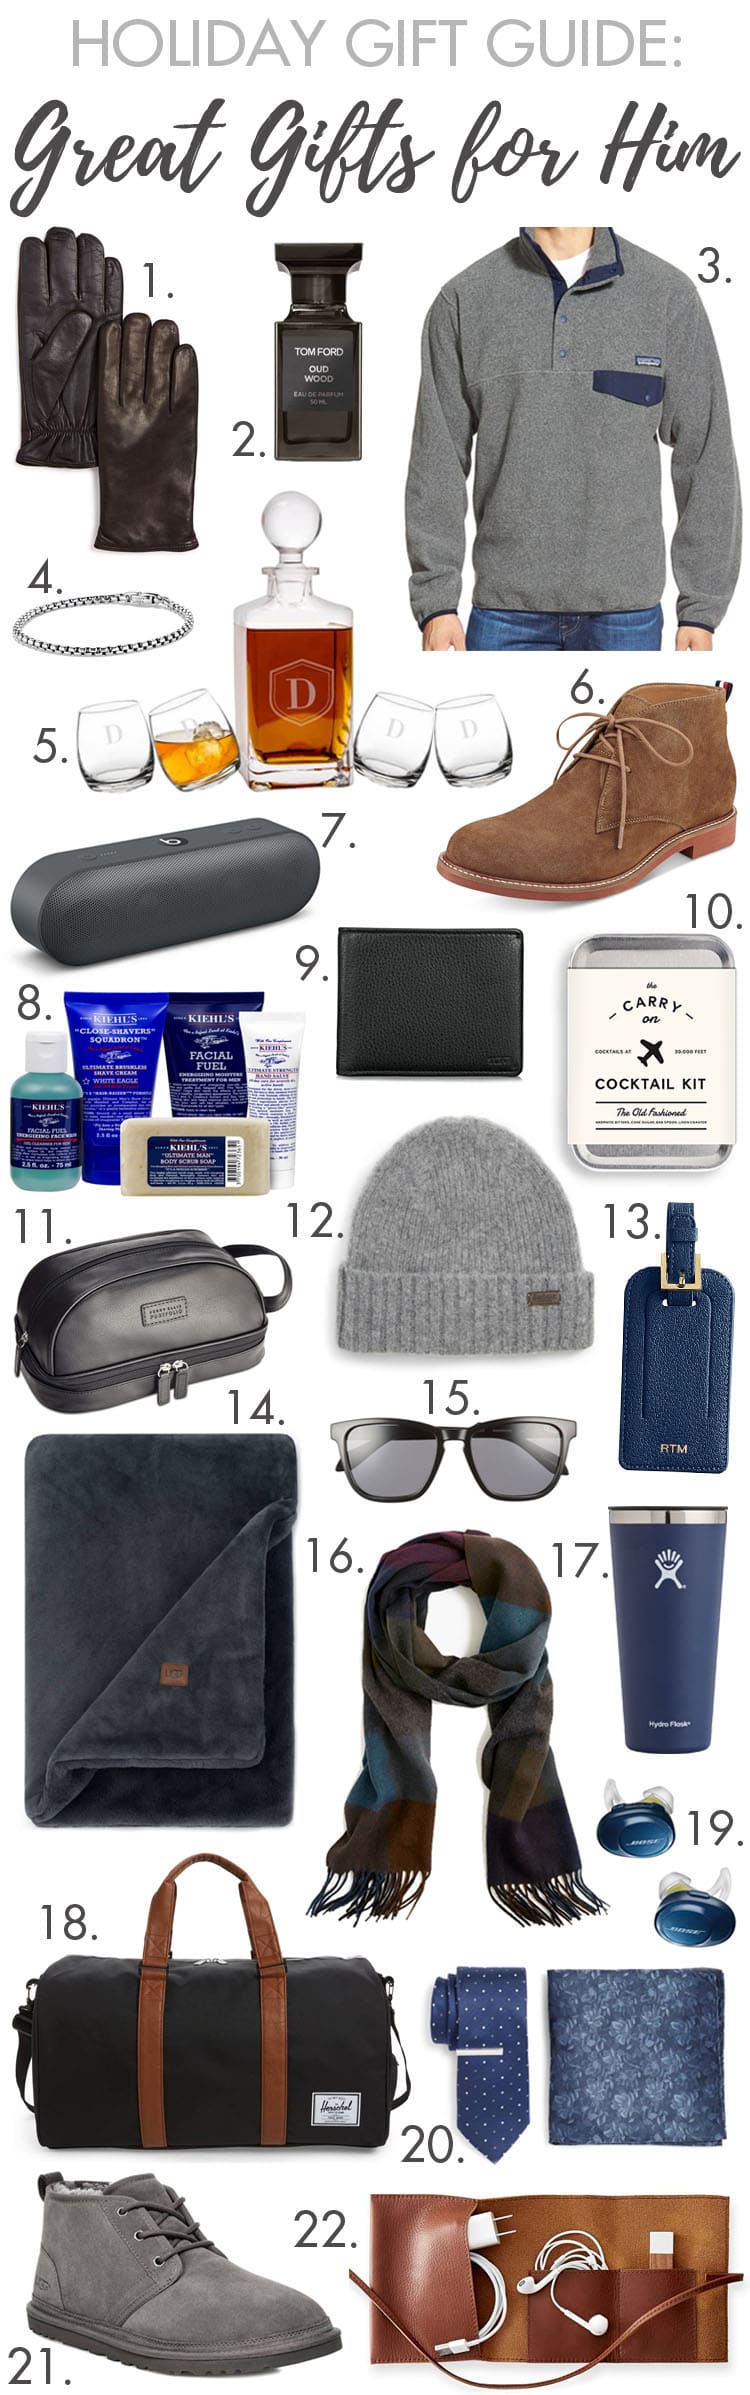 Holiday Gift Guide: Great Gifts for Him